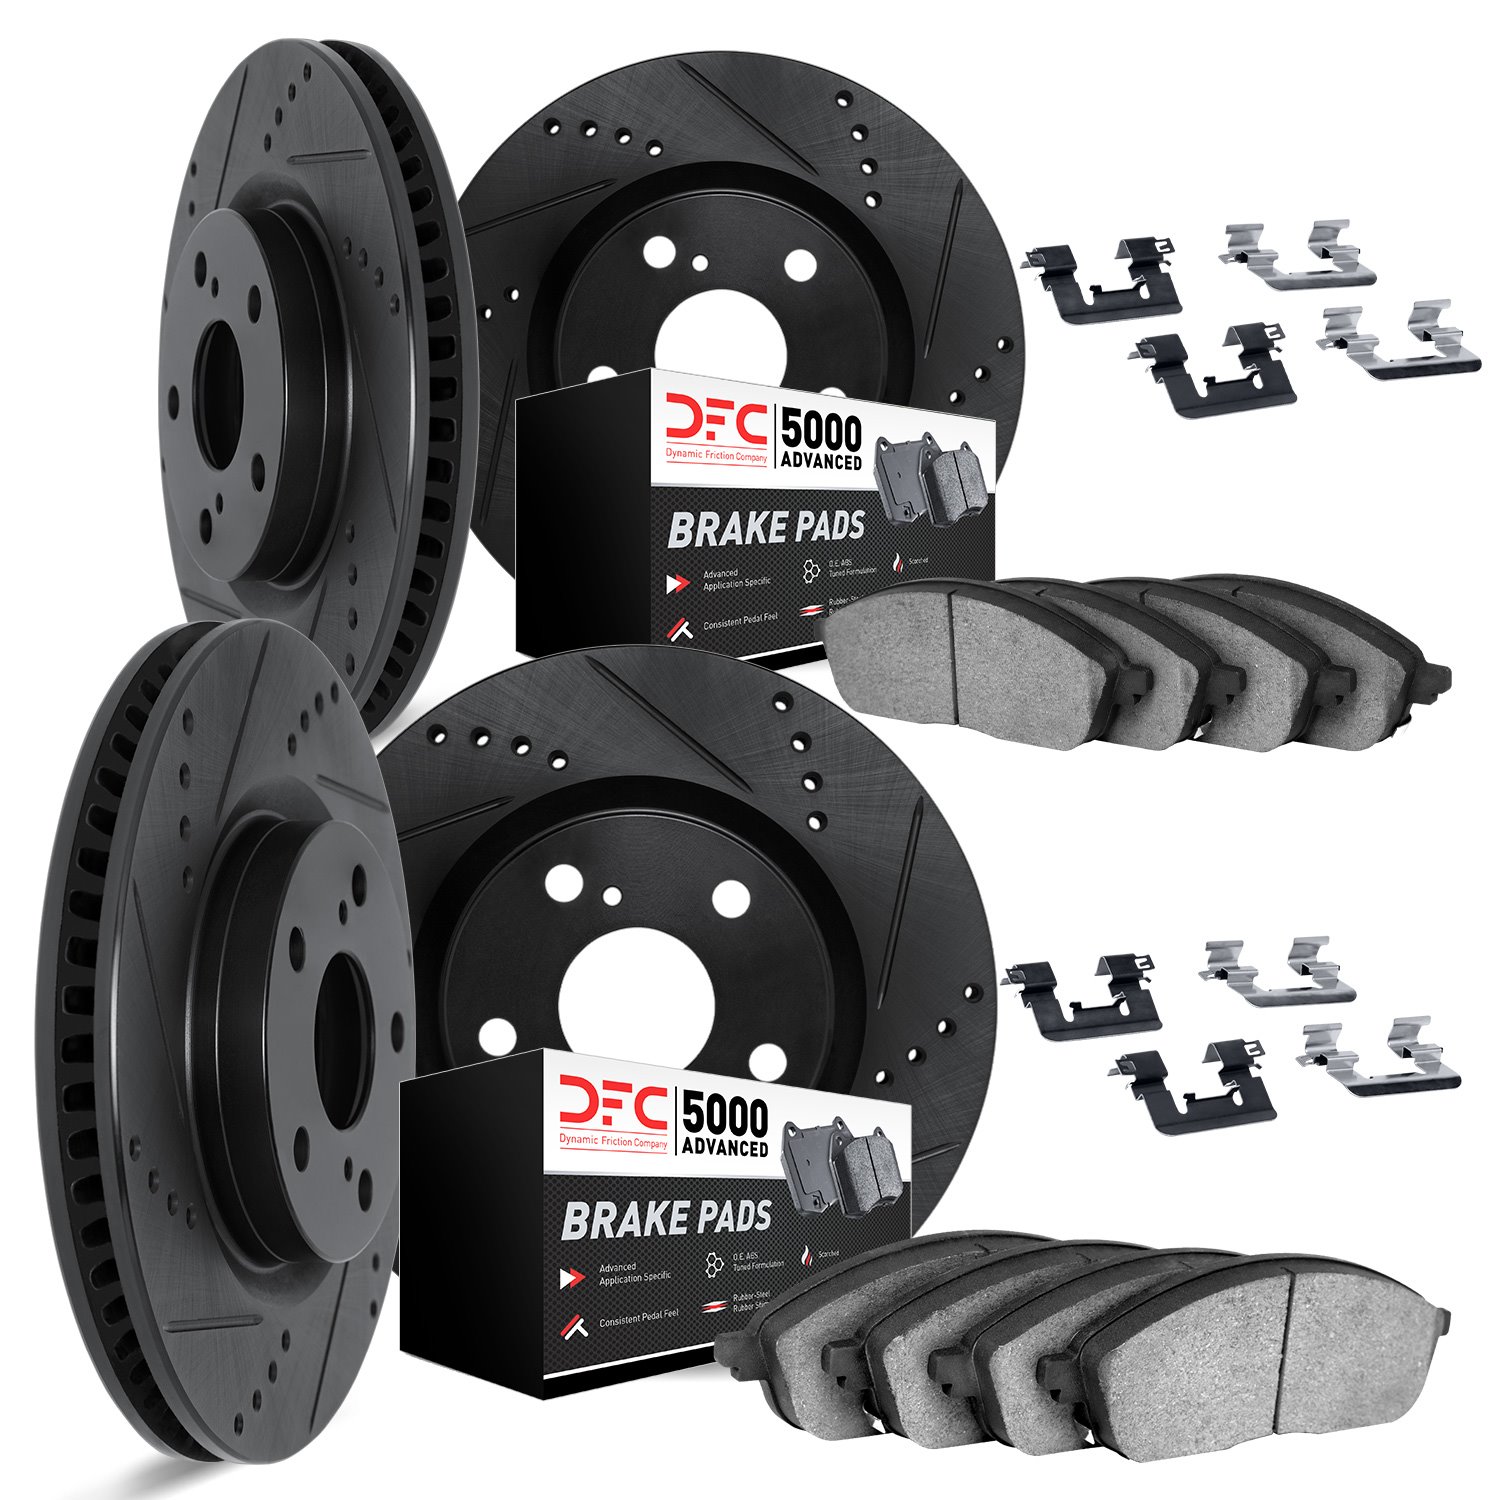 8514-31009 Drilled/Slotted Brake Rotors w/5000 Advanced Brake Pads Kit & Hardware [Black], 2004-2007 BMW, Position: Front and Re